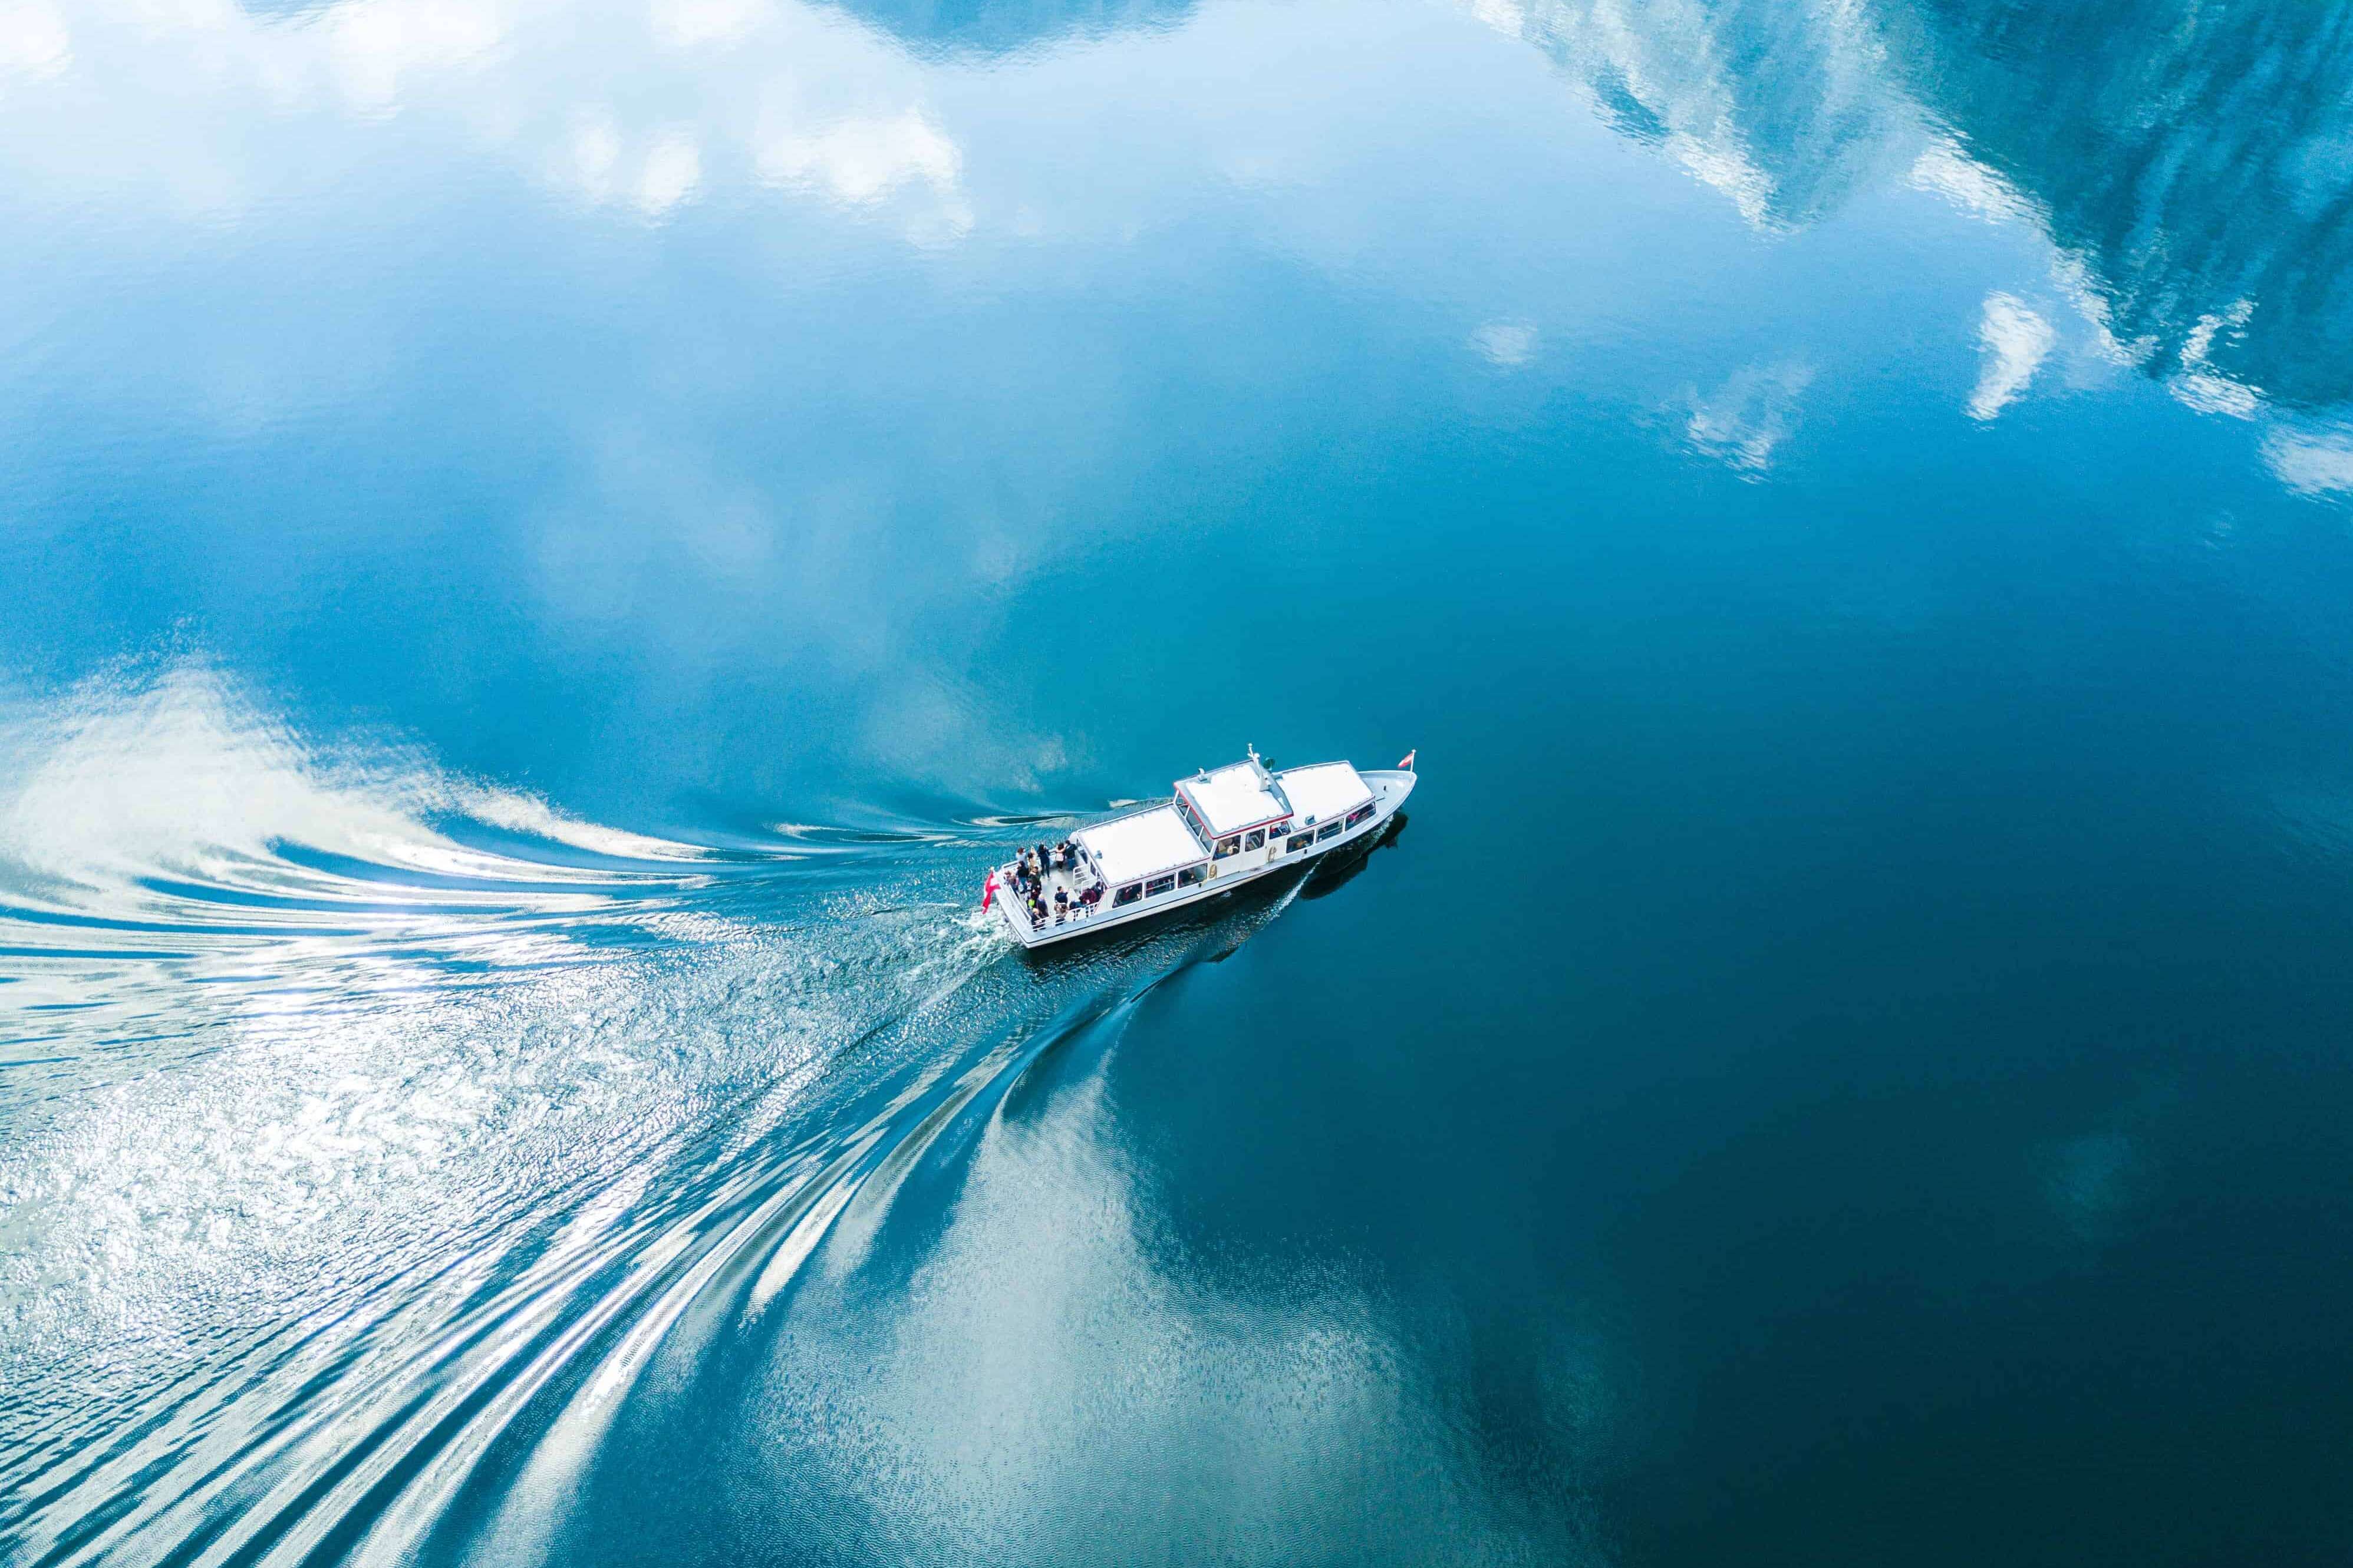 Boat sailing on blue water reflecting mountains